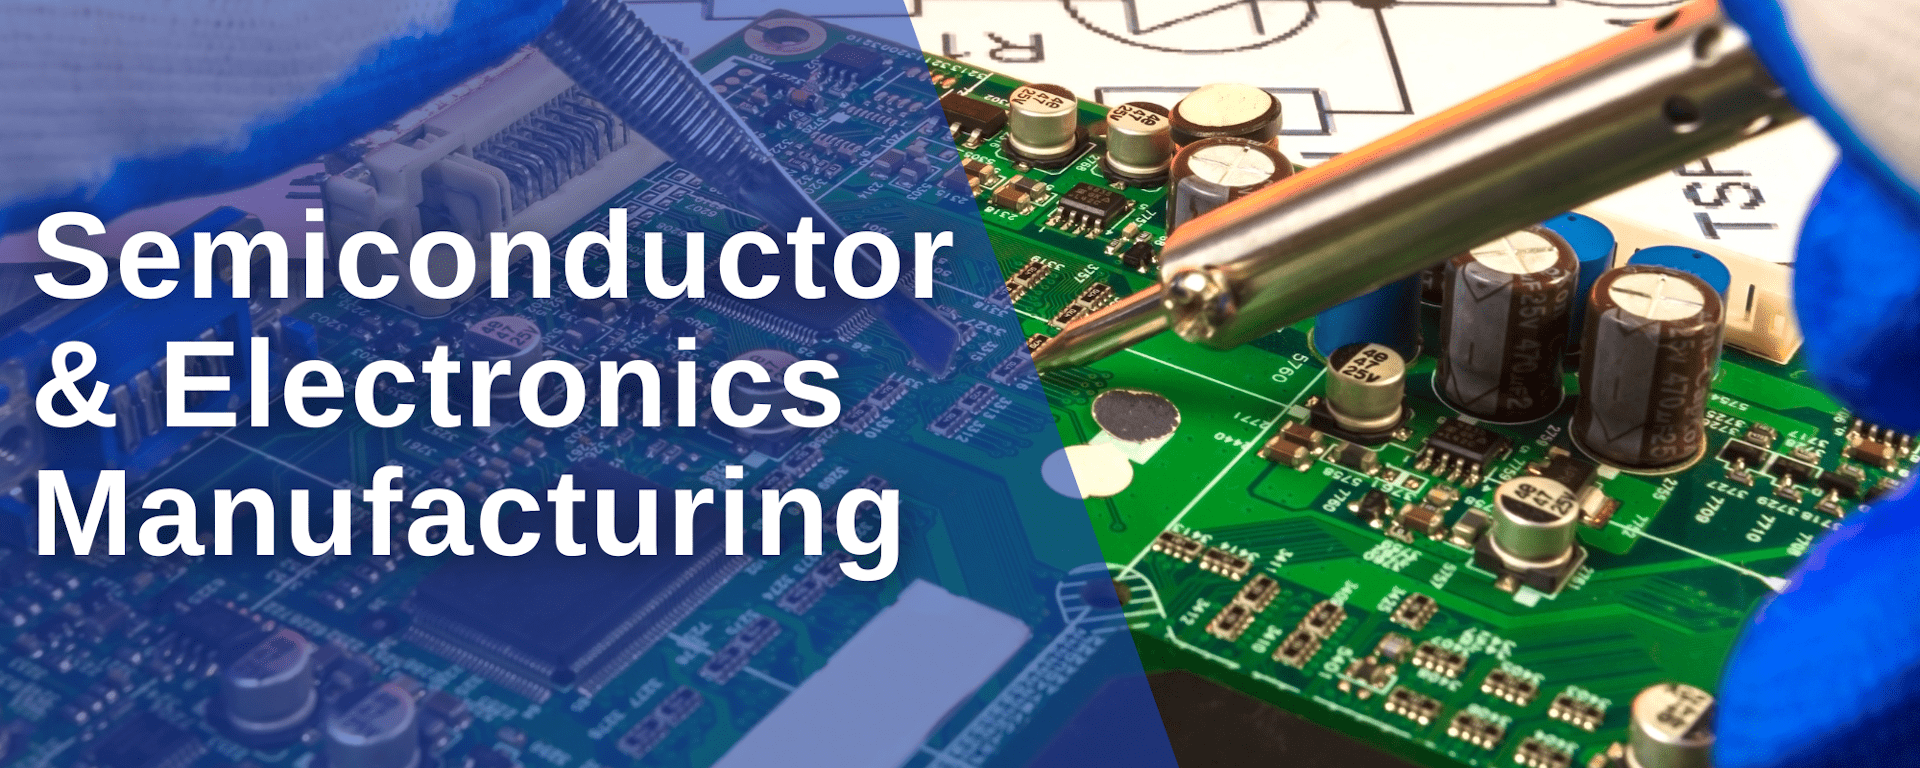 Semiconductor and Electronics Manufacturing